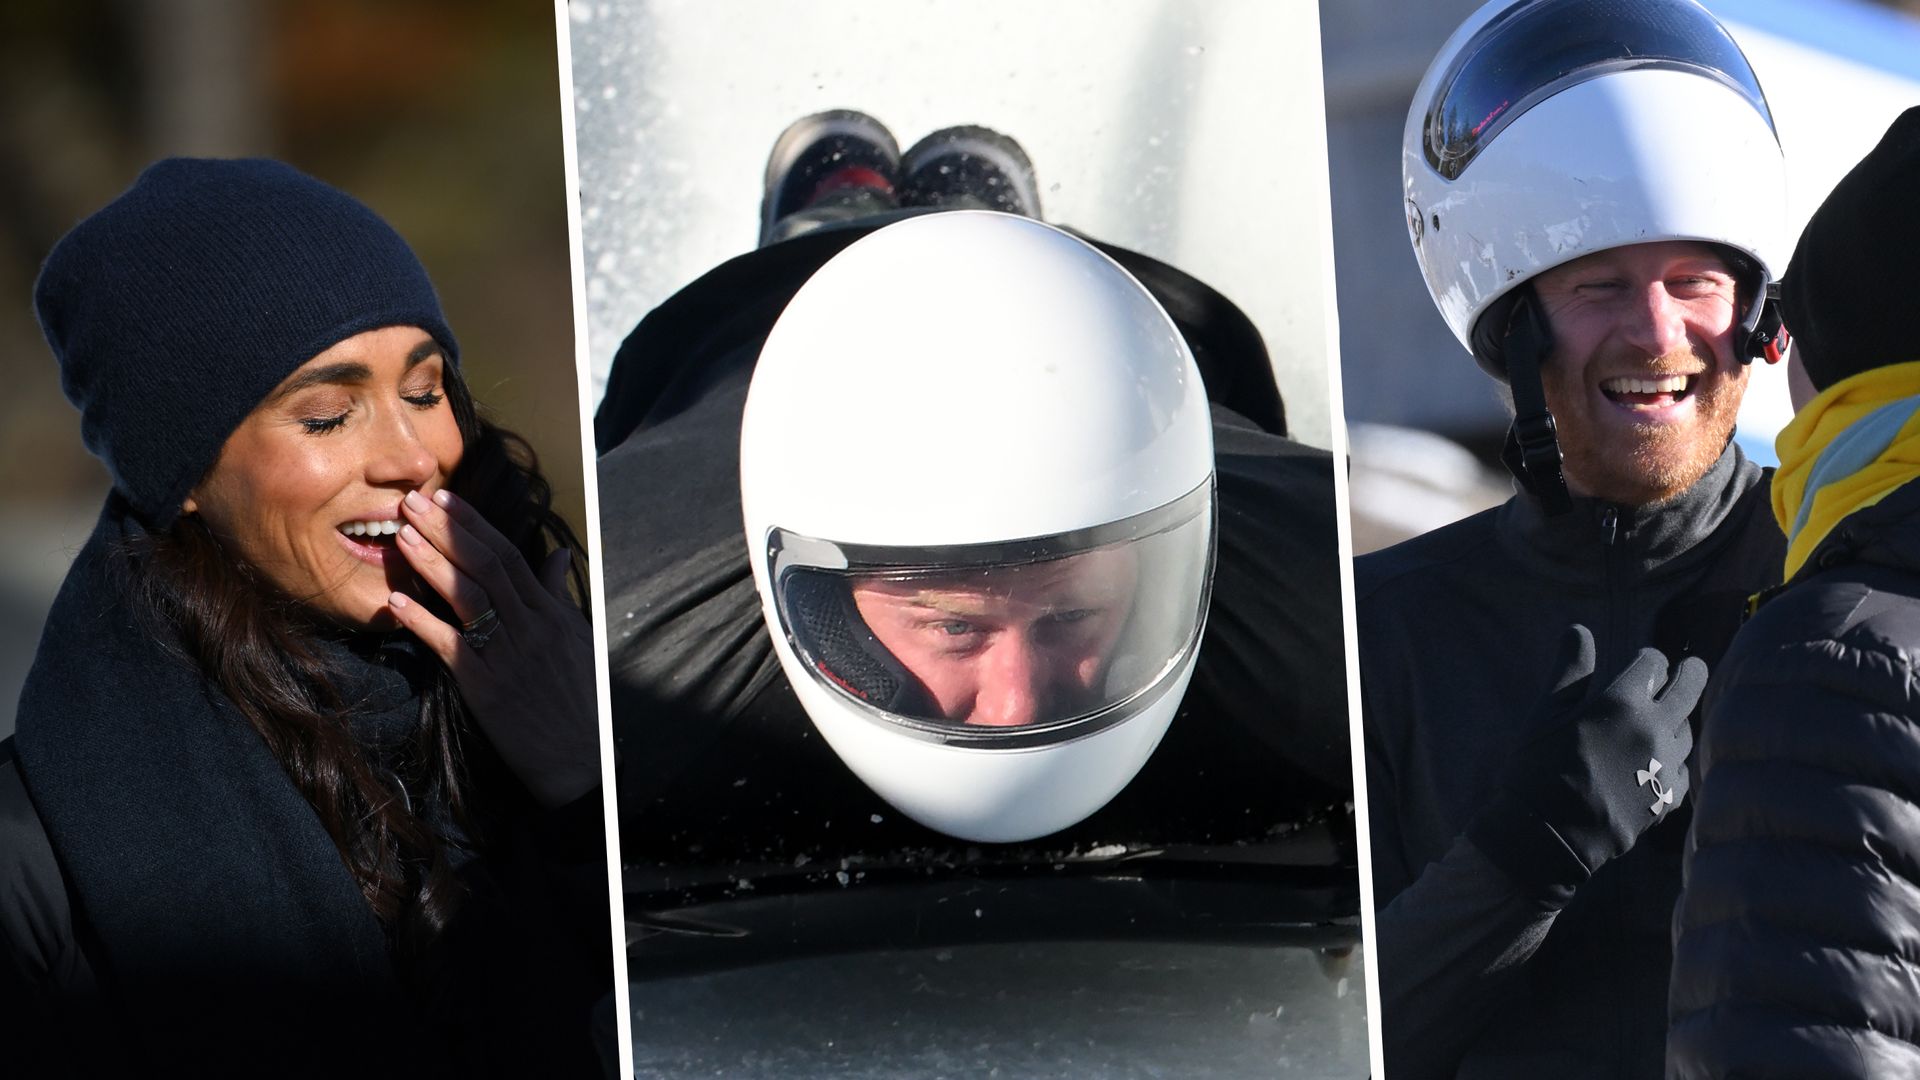 Prince Harry takes on risky Skeleton racing as Meghan Markle reacts during day two of Canada trip – best moments